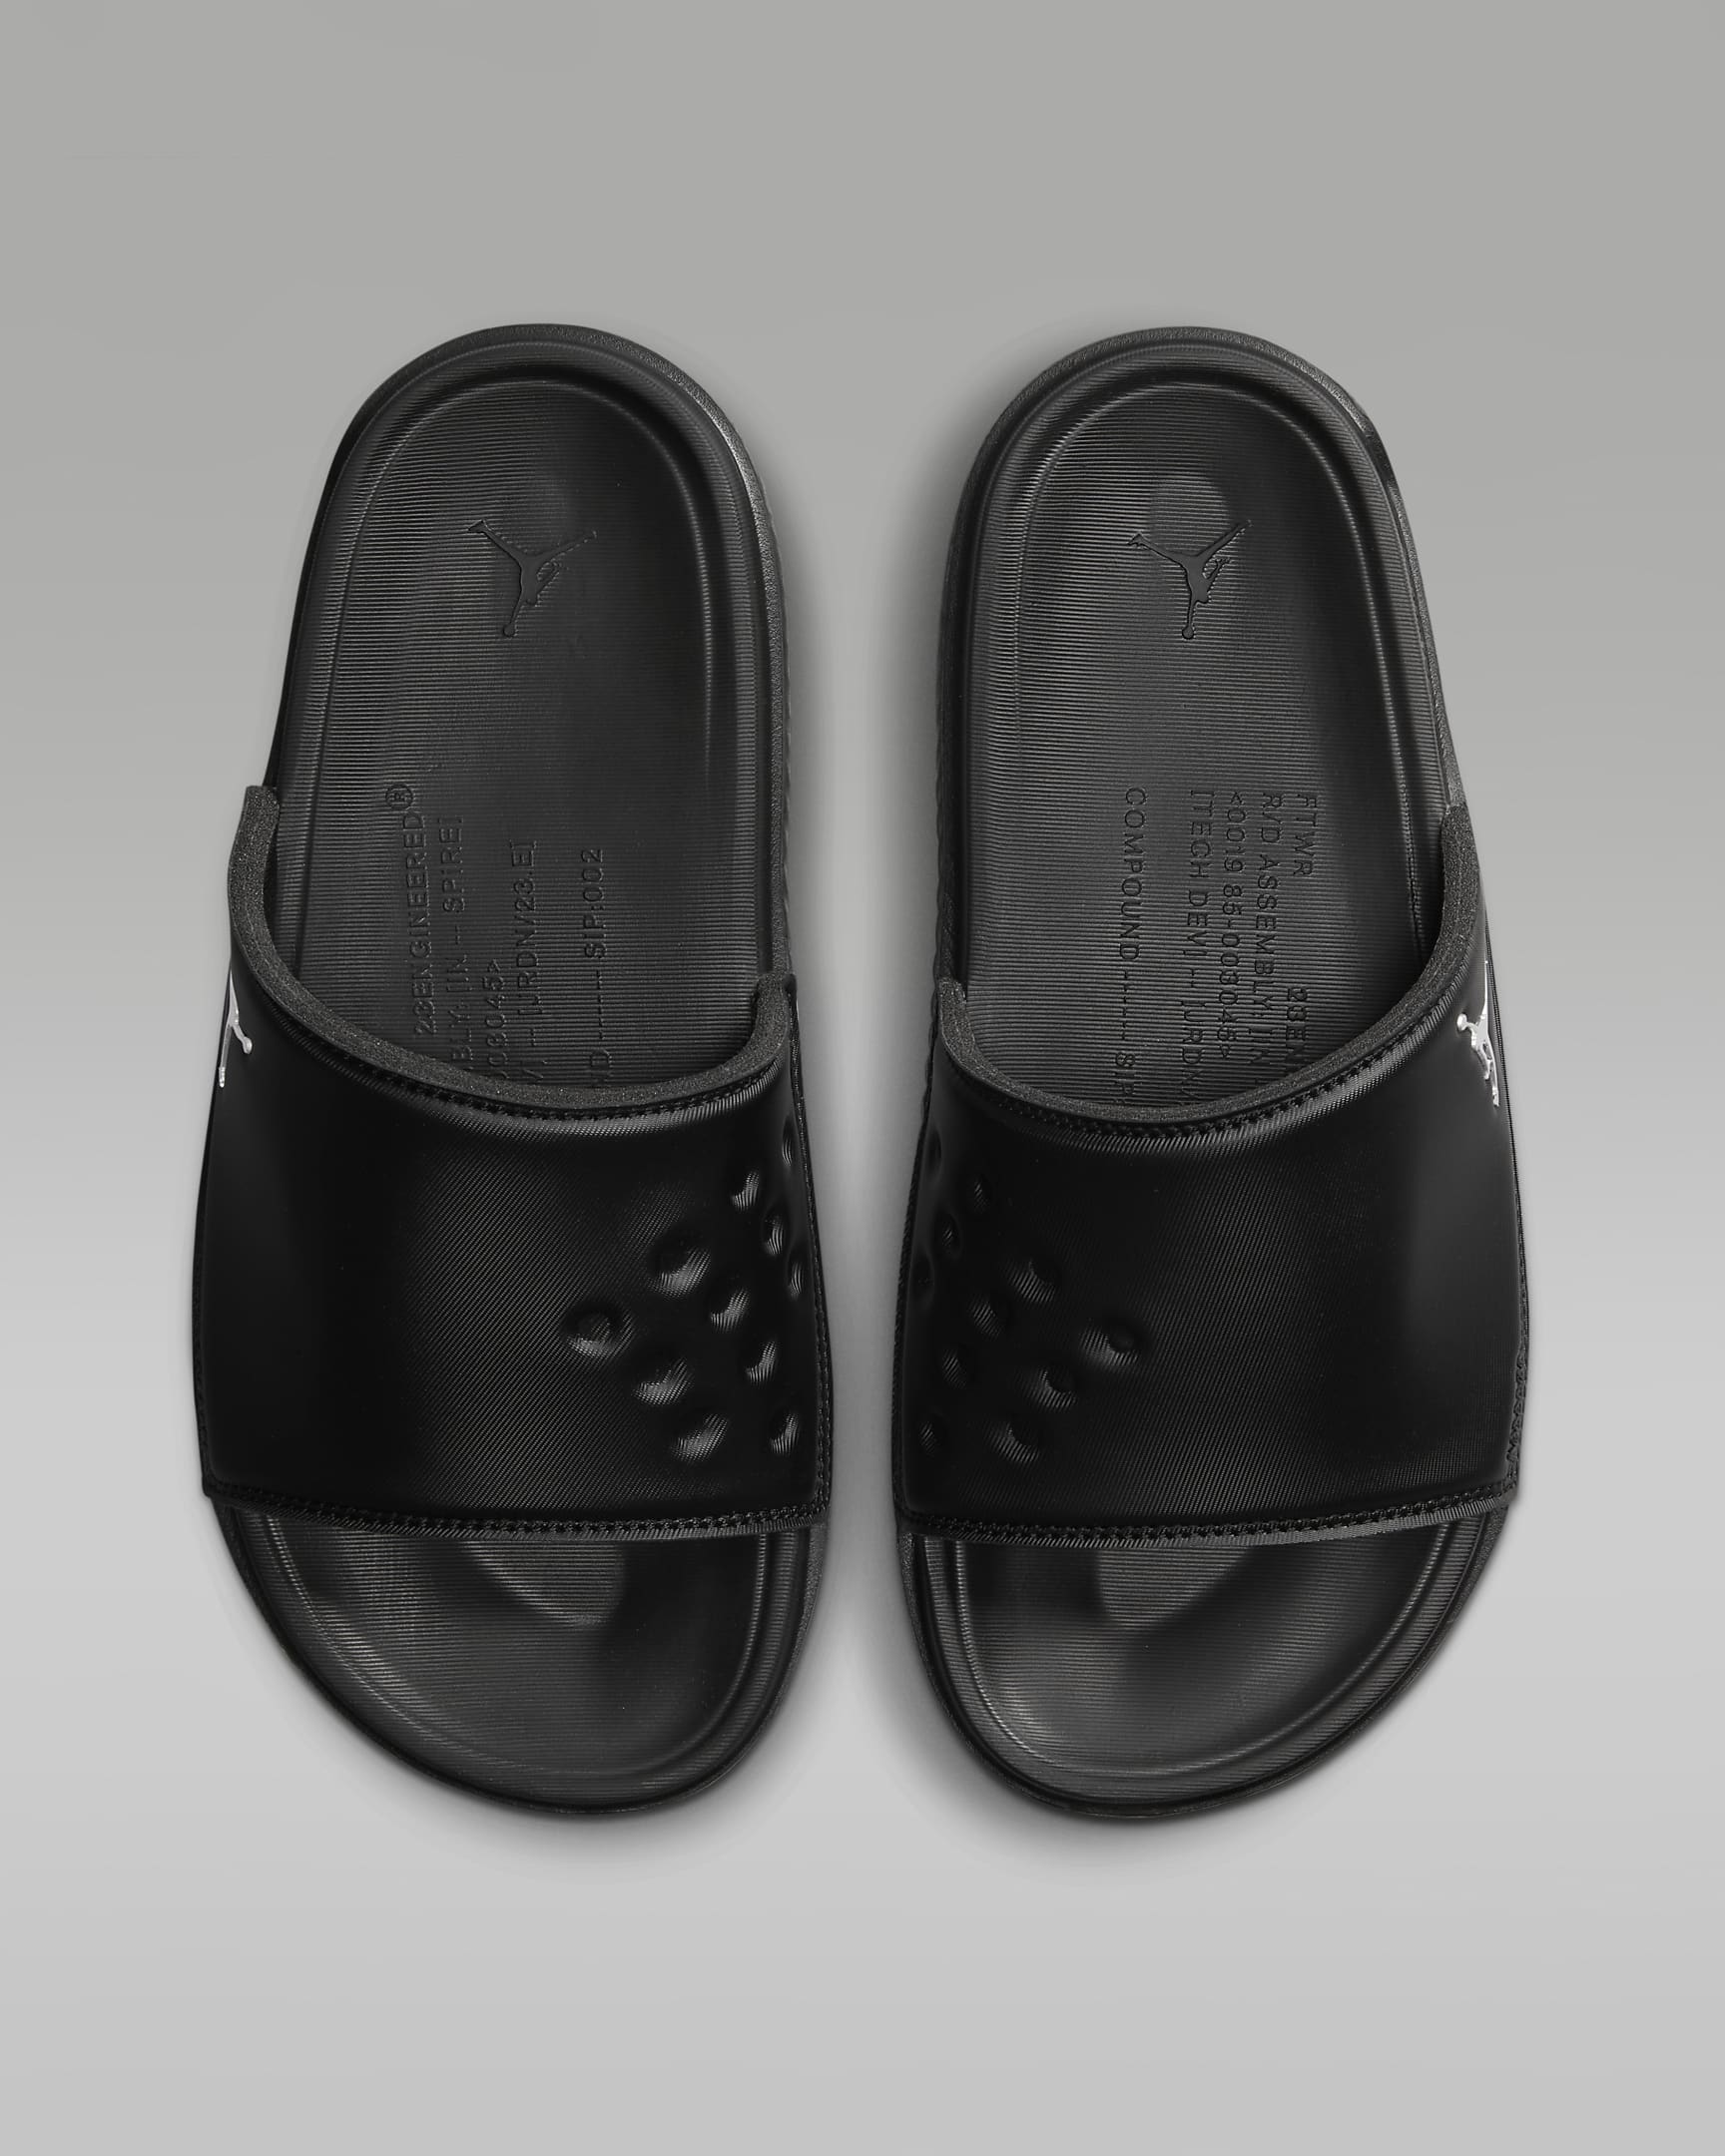 Walk in Style: Jordan Play Men’s Slides Review and Recommendations